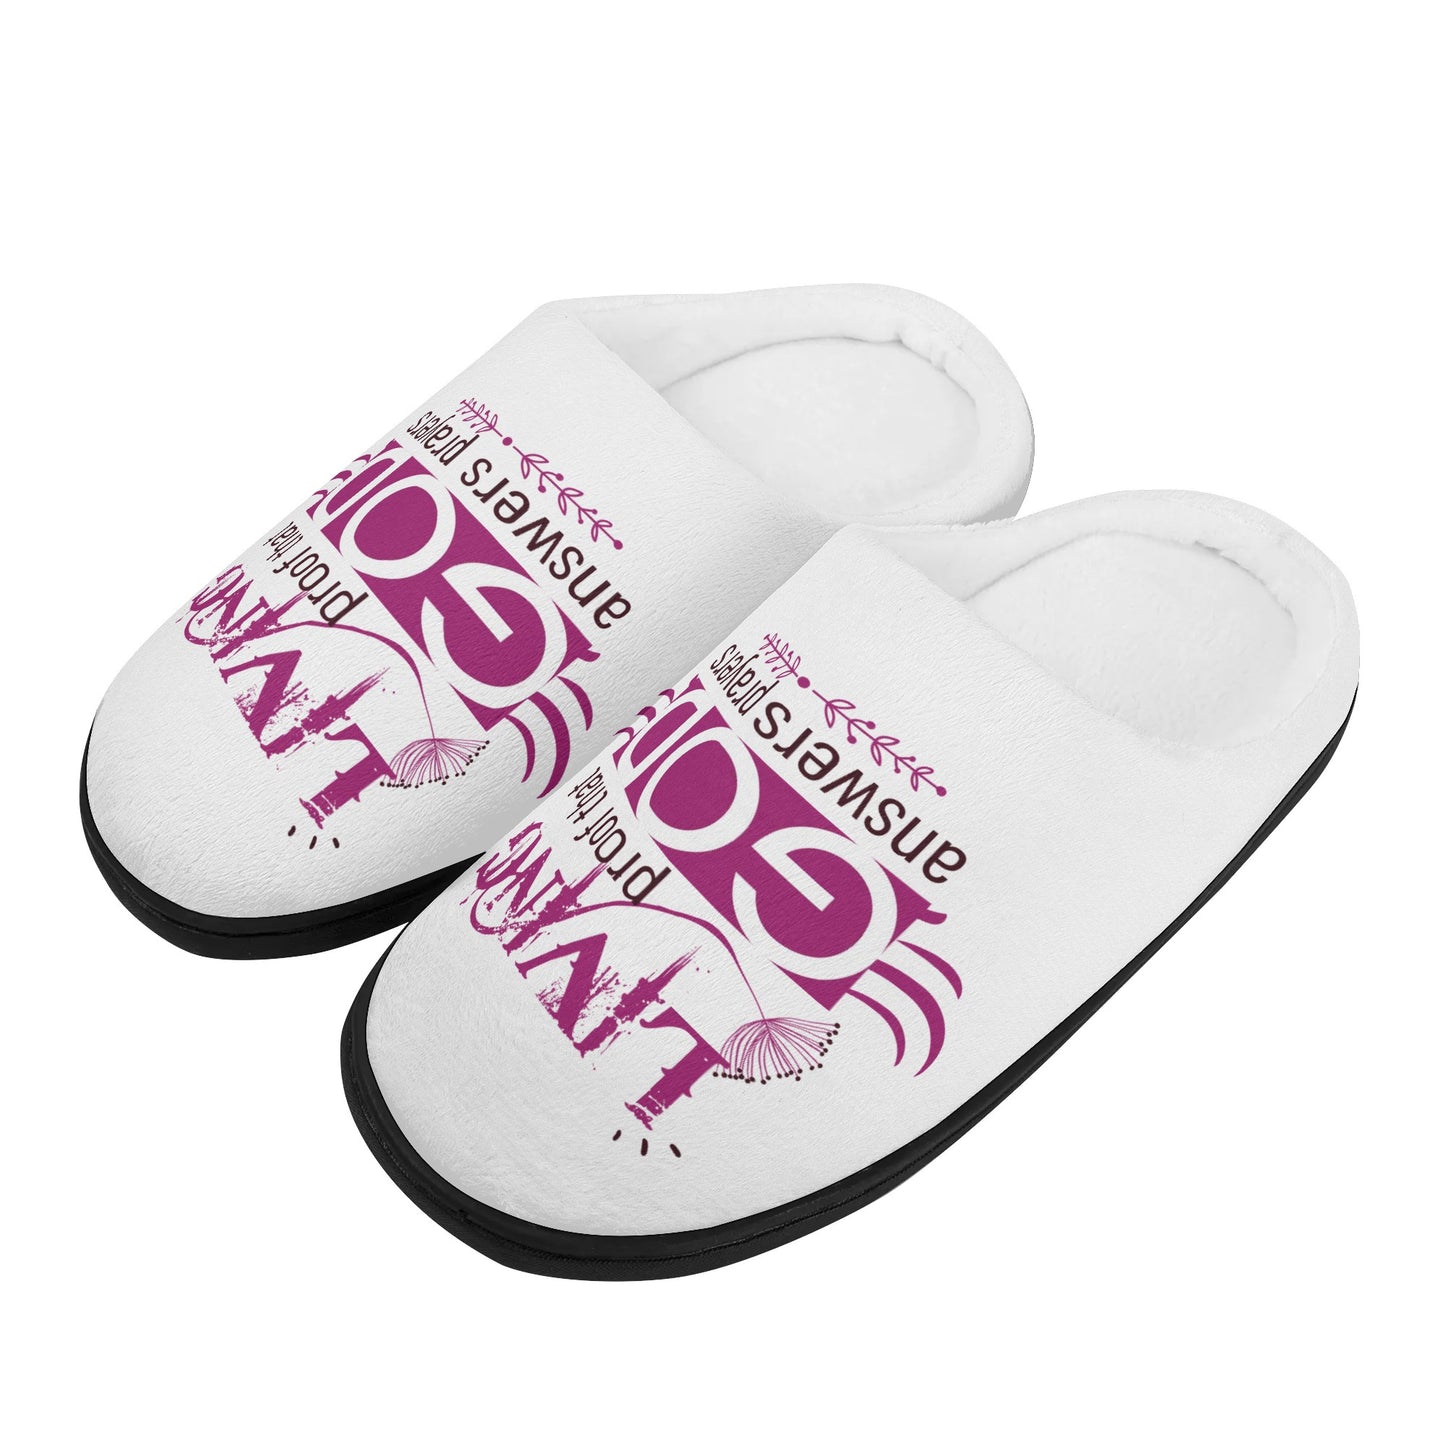 Living Proof That God Answers Prayers Unisex Rubber Autumn Christian Slipper Room Shoes popcustoms